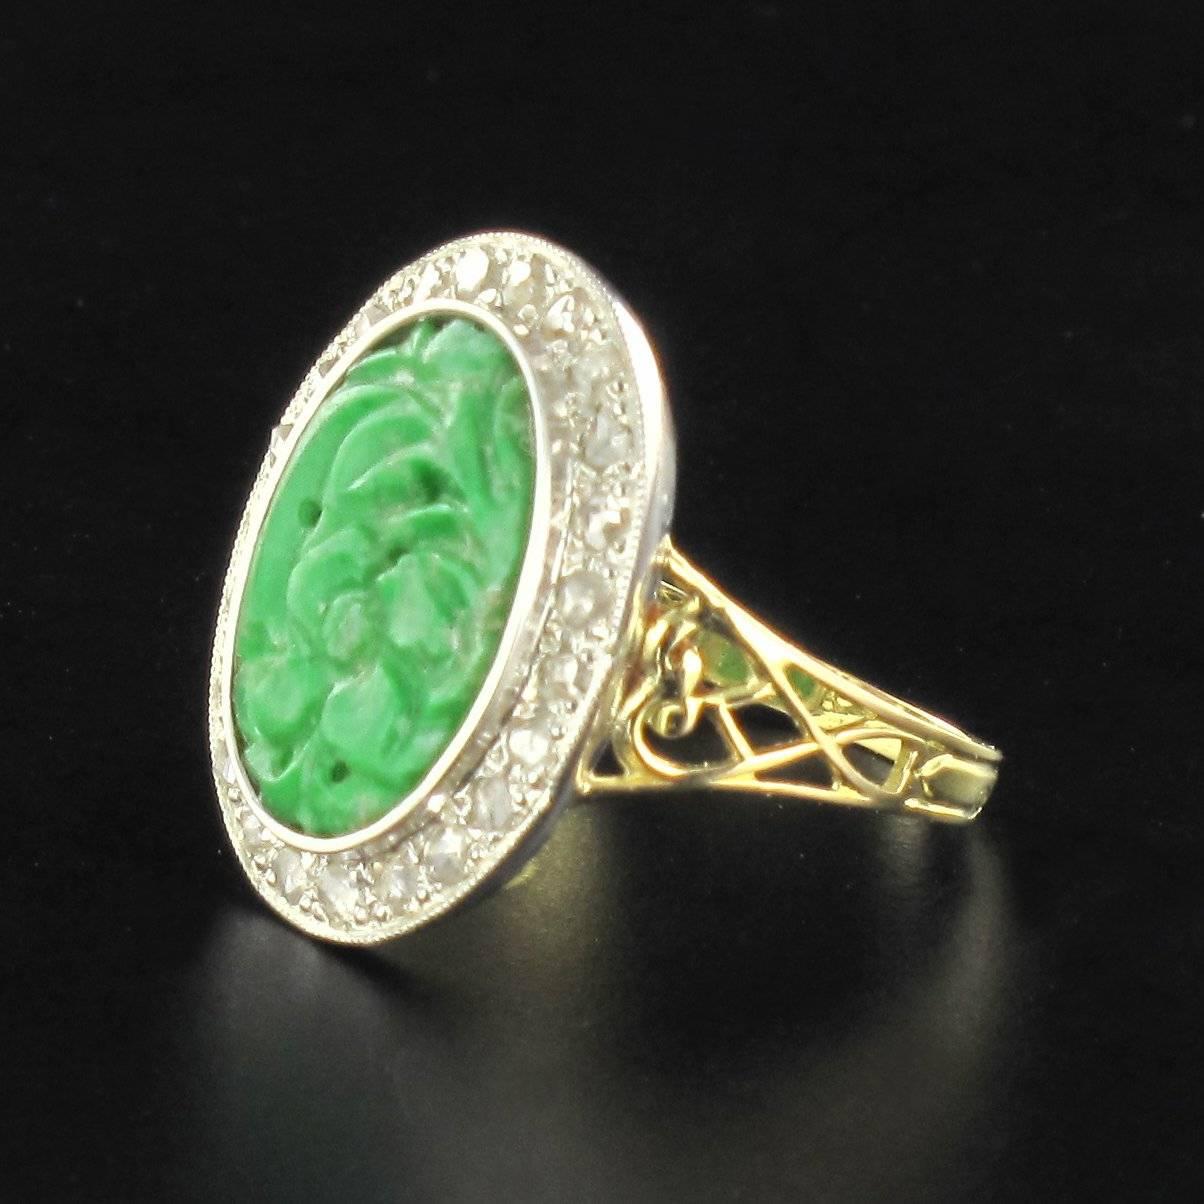 Ring in 18K yellow gold, and silver, mixed hallmark.
The head of the ring is dominated by a flower engraved oval jade centre surrounded by rose cut diamonds. The shoulders are attractively decorated with a lace pattern leading into the ring band.